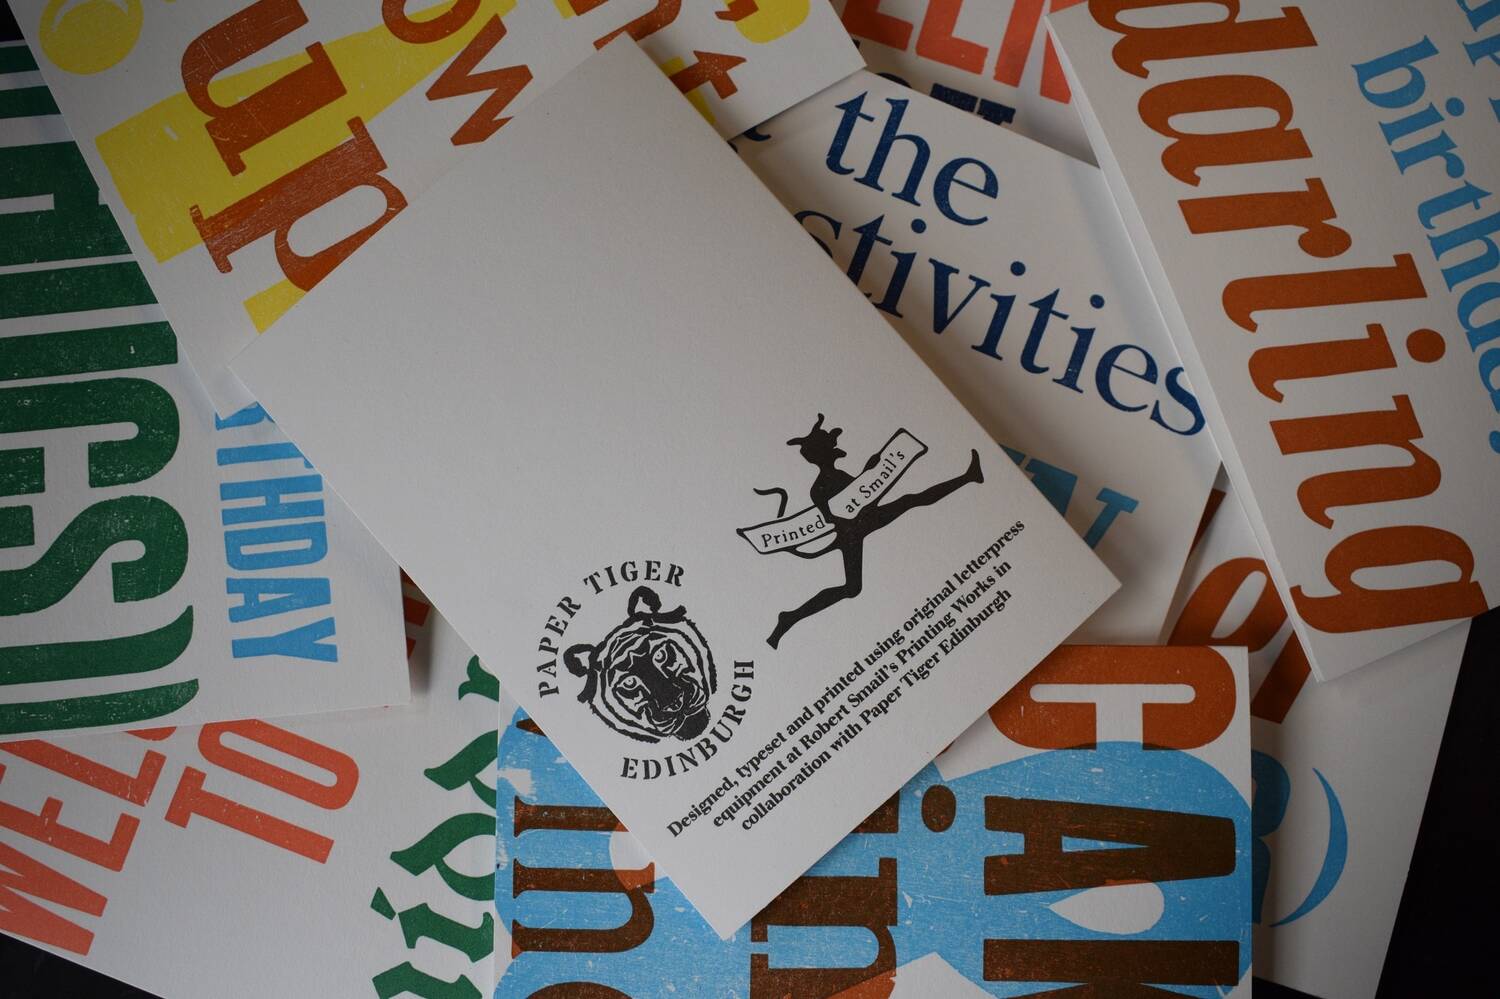 A pile of letterpress-printed cards are arranged over a flat surface. Most cards are bright and colourful, and are facing up. The card on the top of the pile is reverse-side up. It shows the logos of Paper Tiger and Robert Smail's Printing Works, as well as a couple of lines of text describing how the cards are printed.